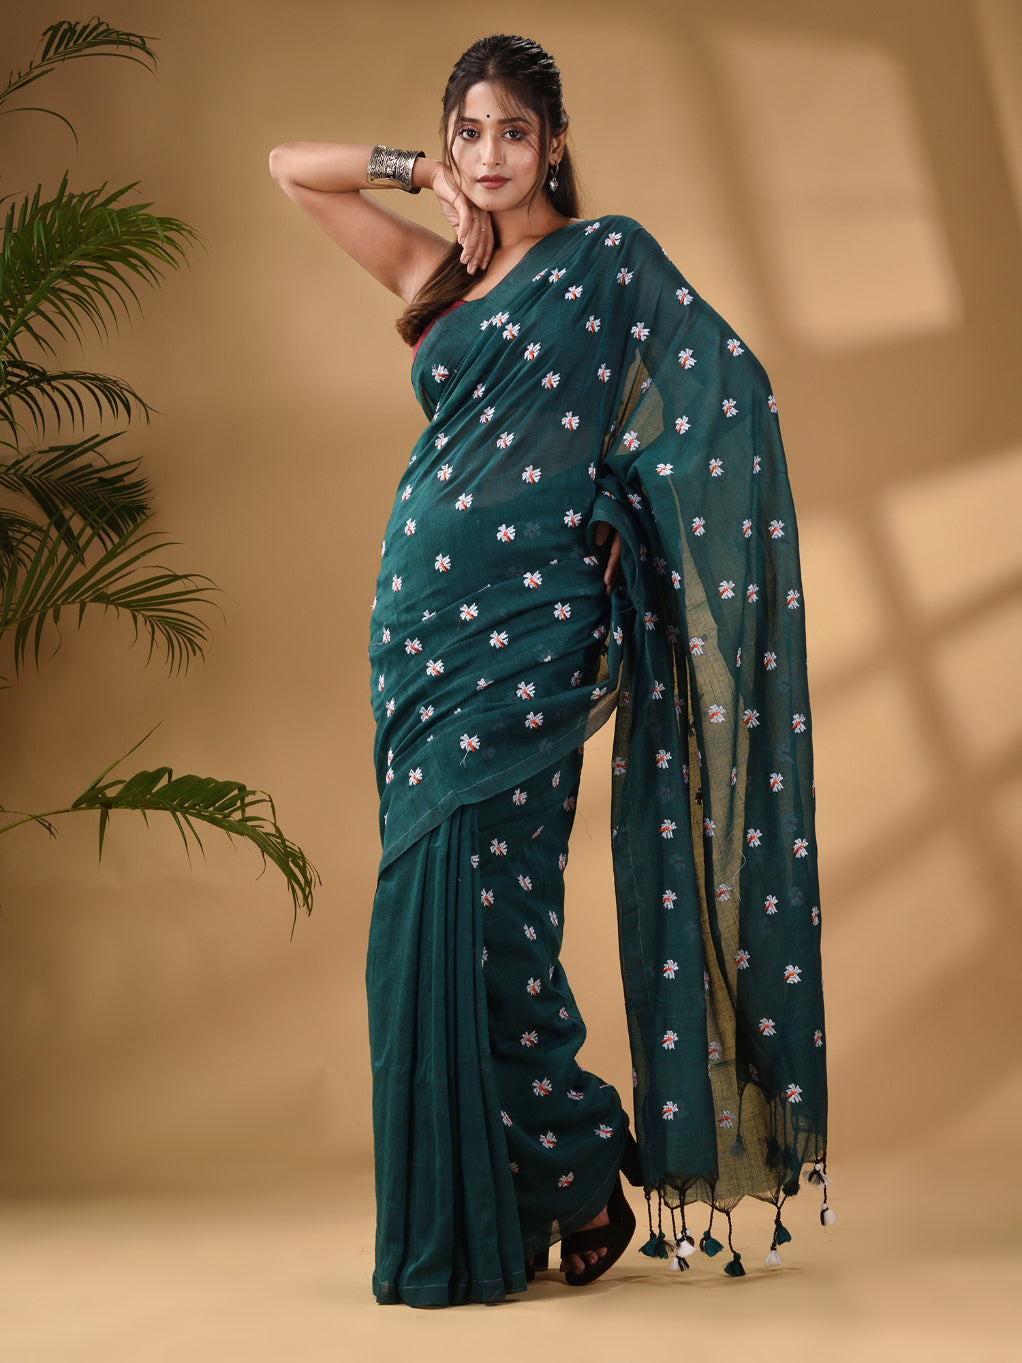 Teal Cotton Handwoven Soft Saree With Floral Motifs